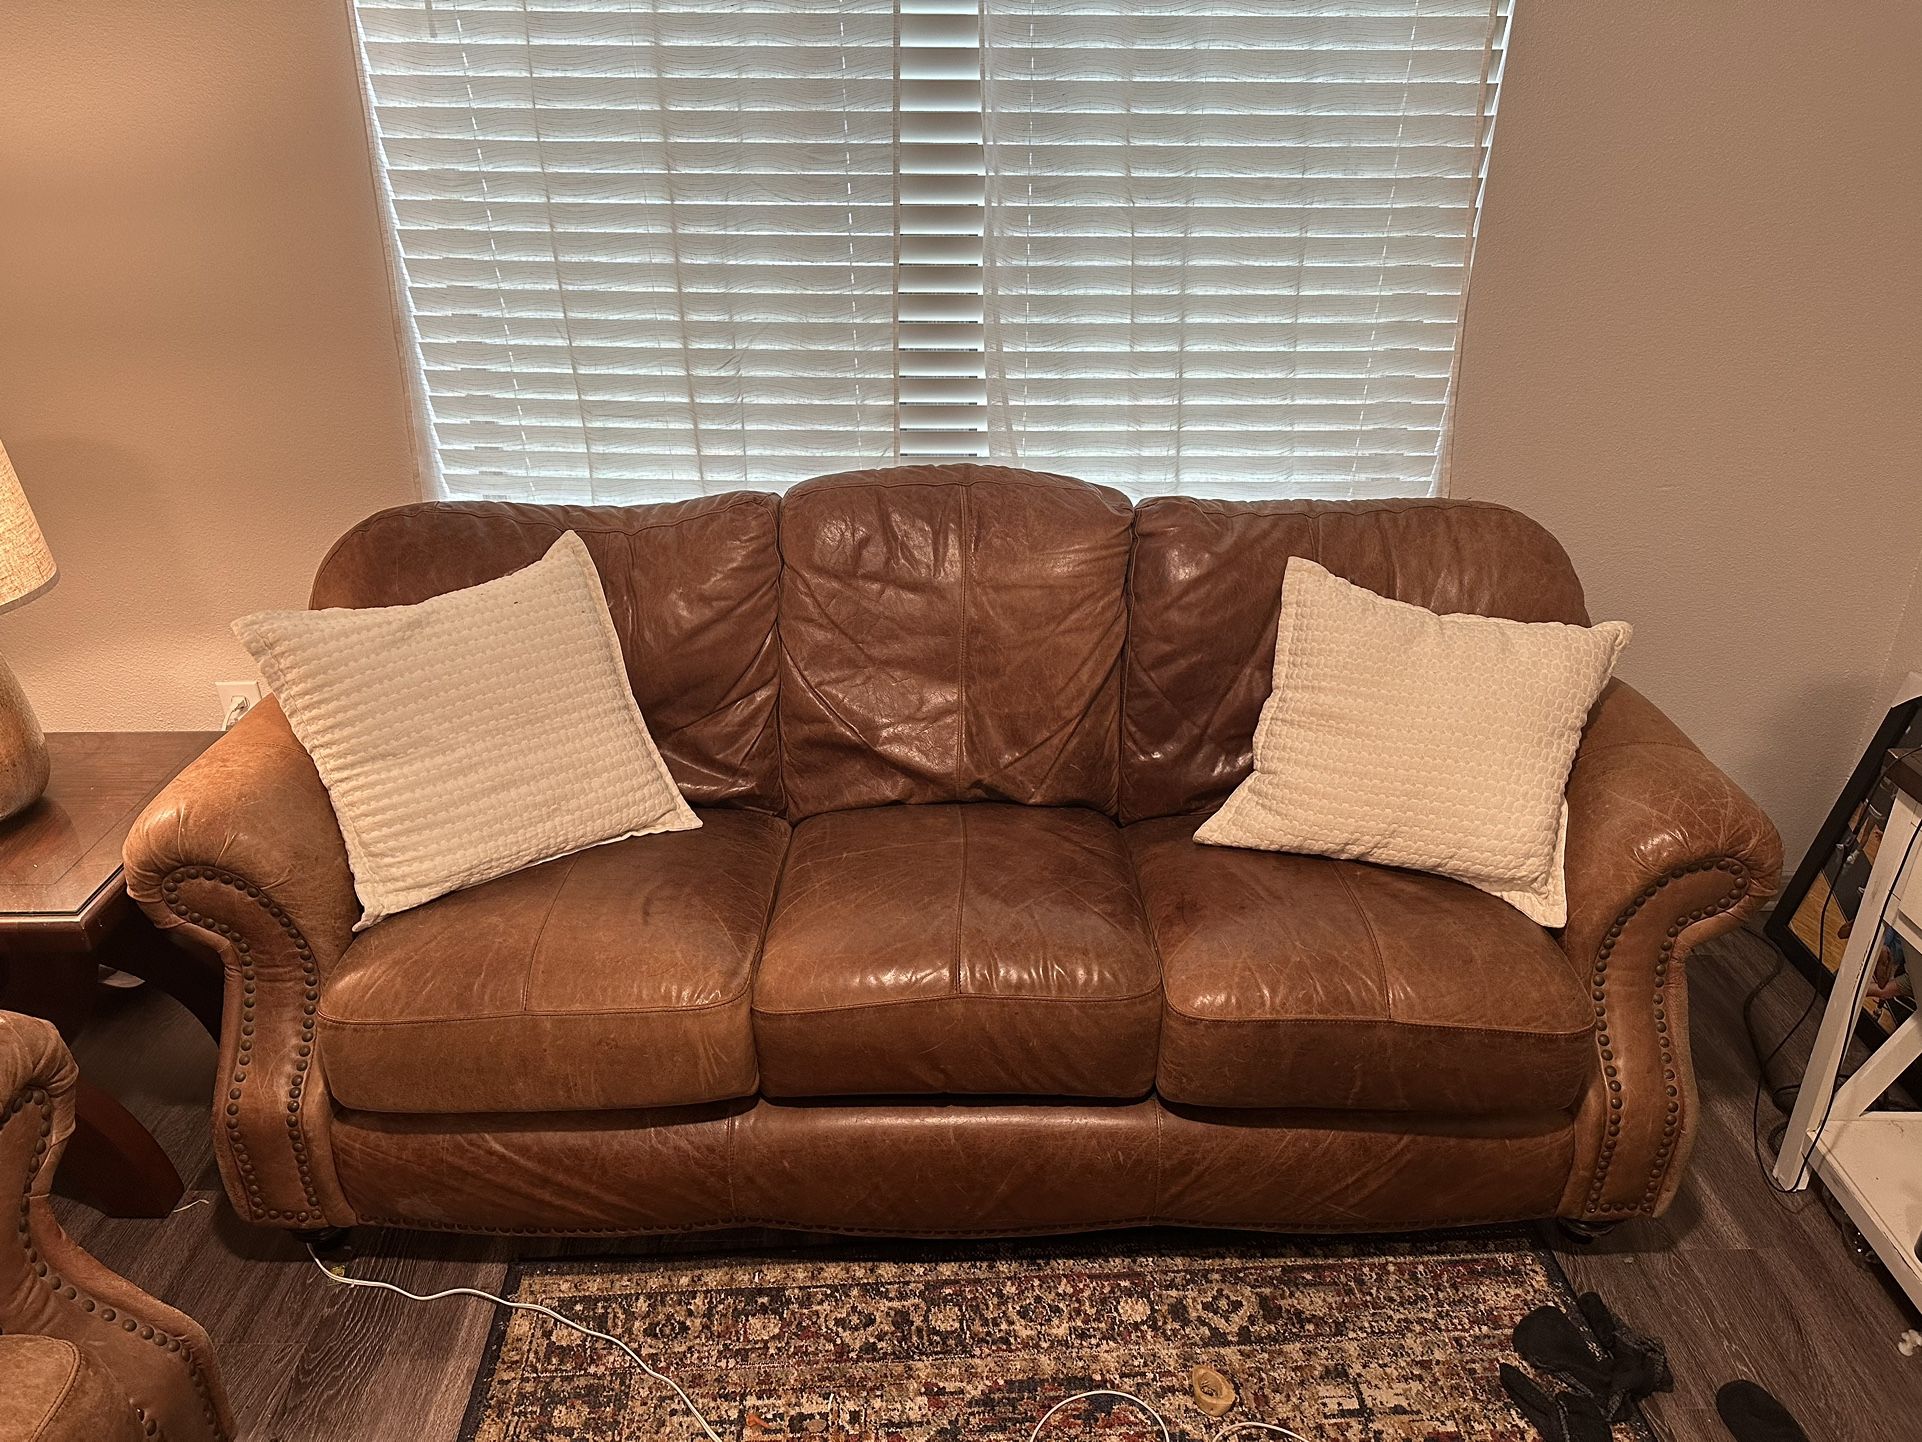 2 Leather Couches